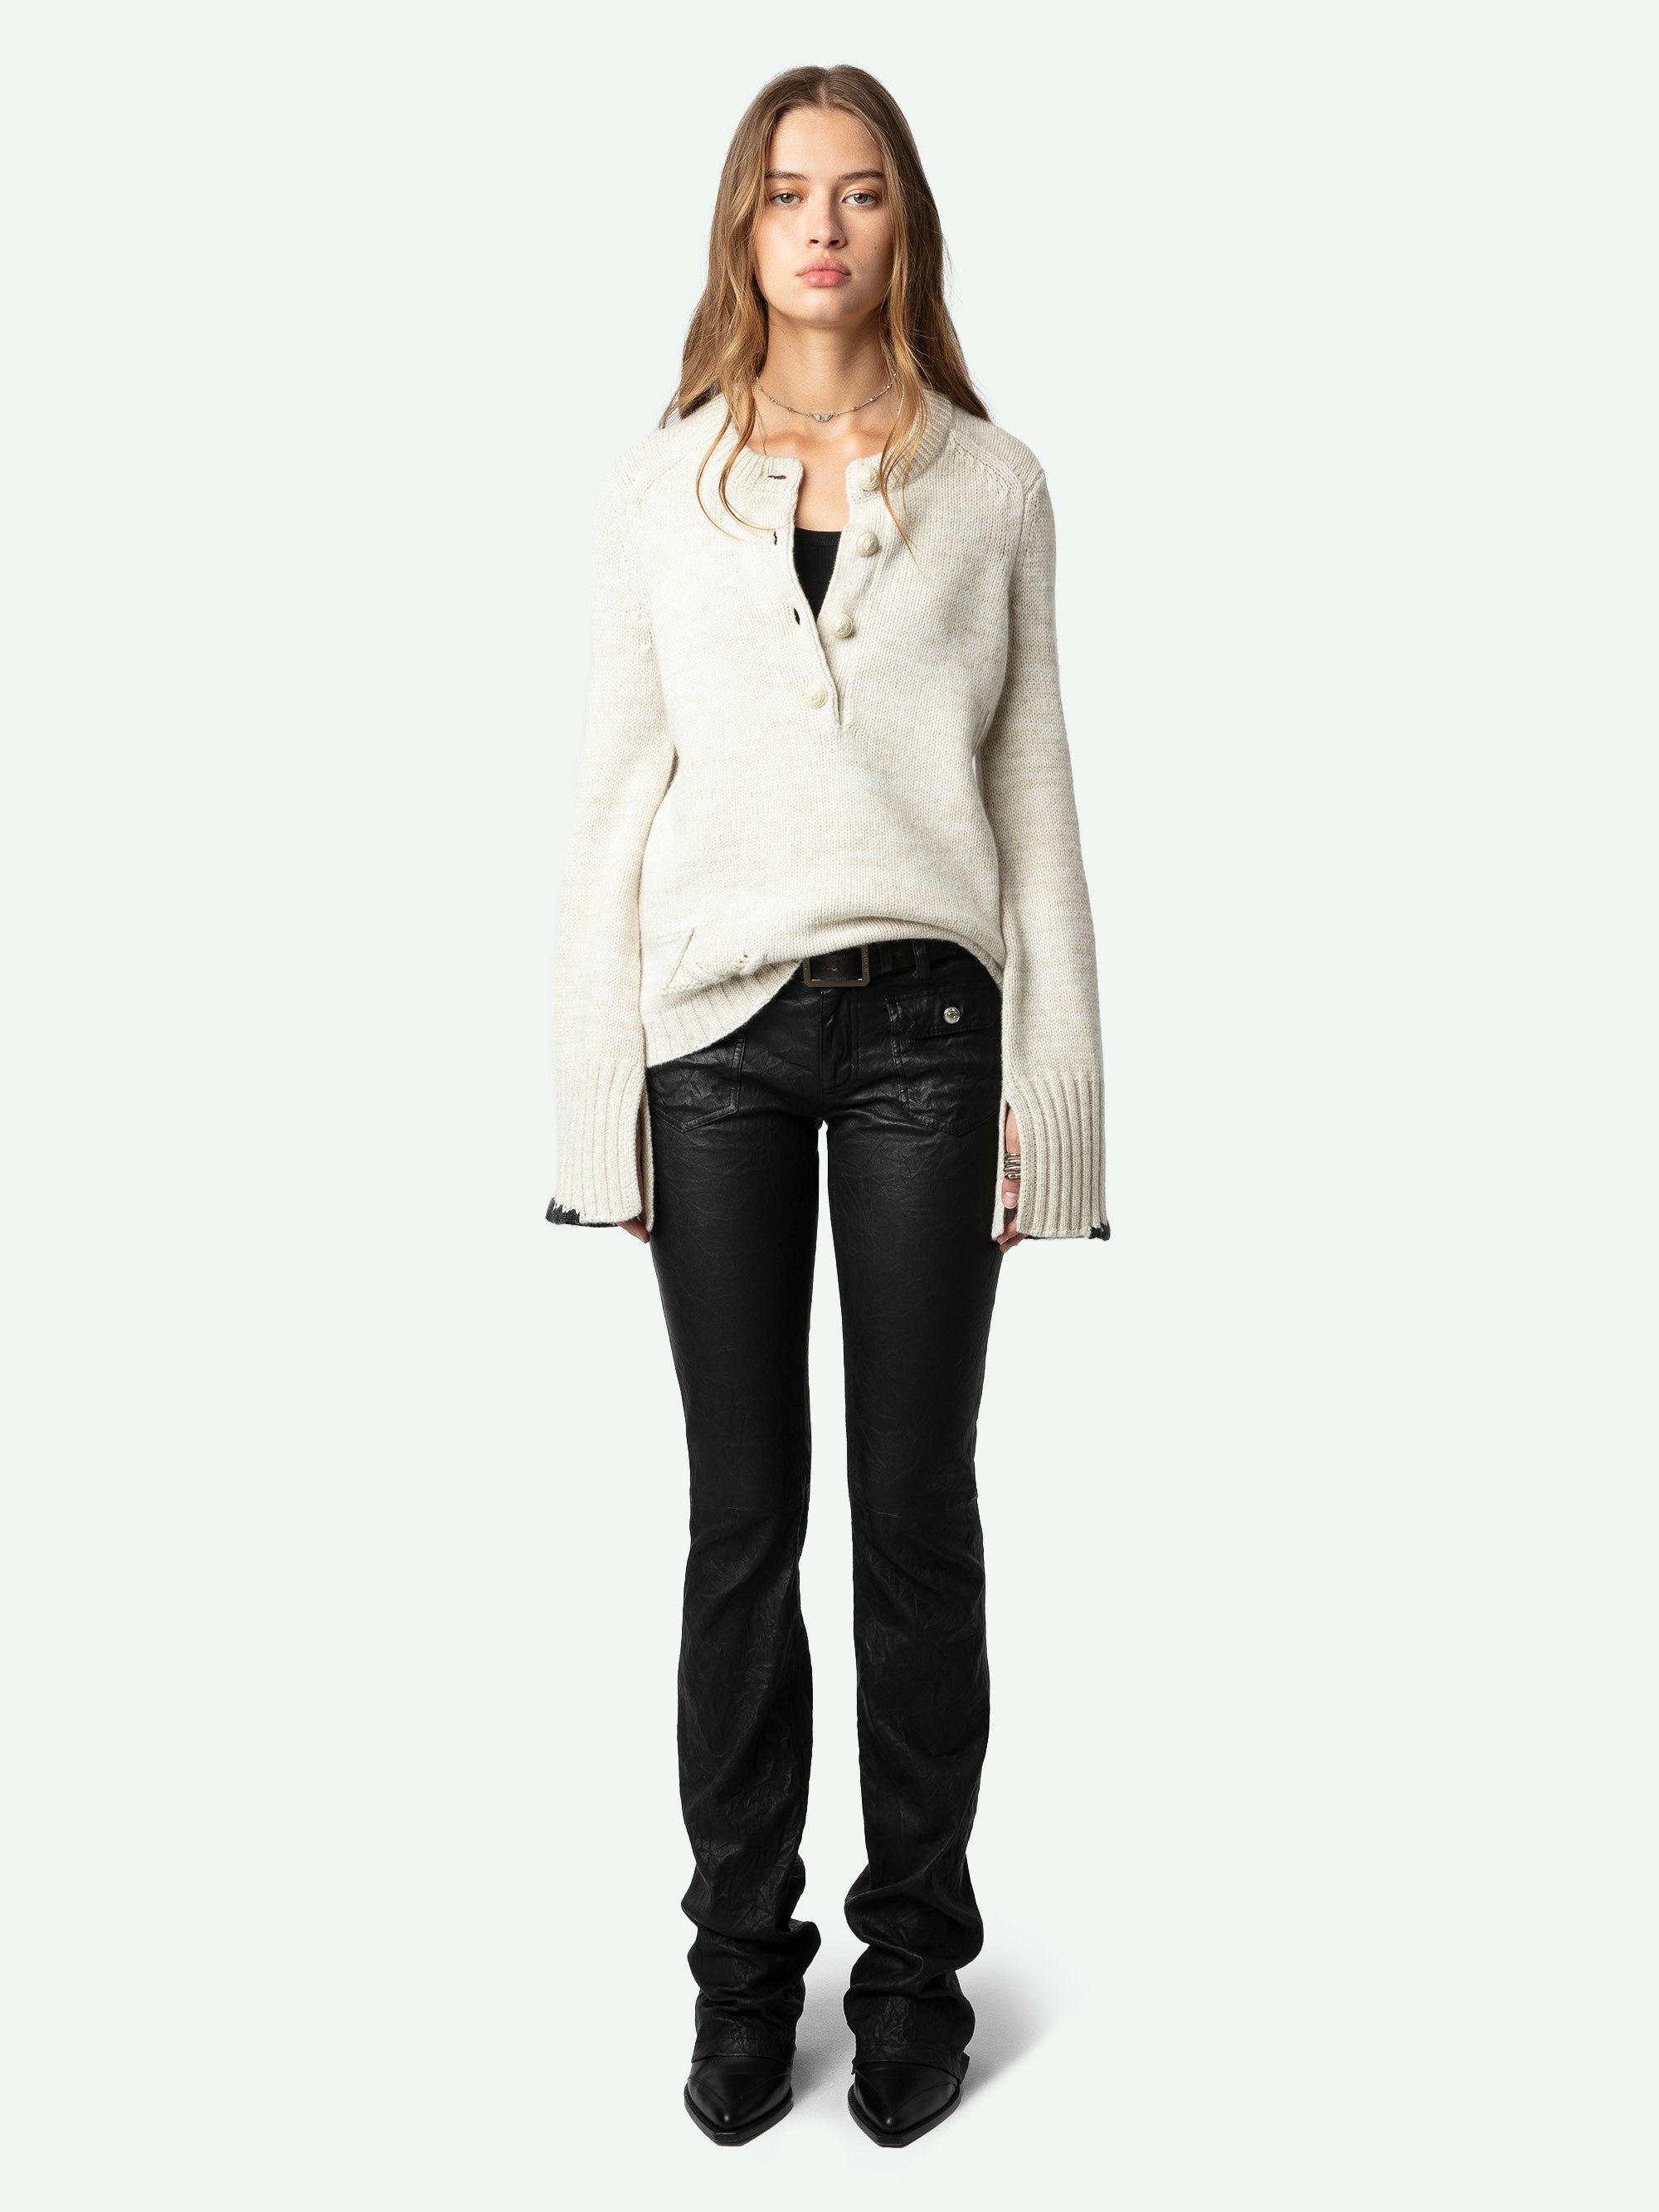 Halty Jumper - Long-sleeved beige cashmere and merino wool jumper with geometric patterns on elbows and contrasting mitered cuffs.